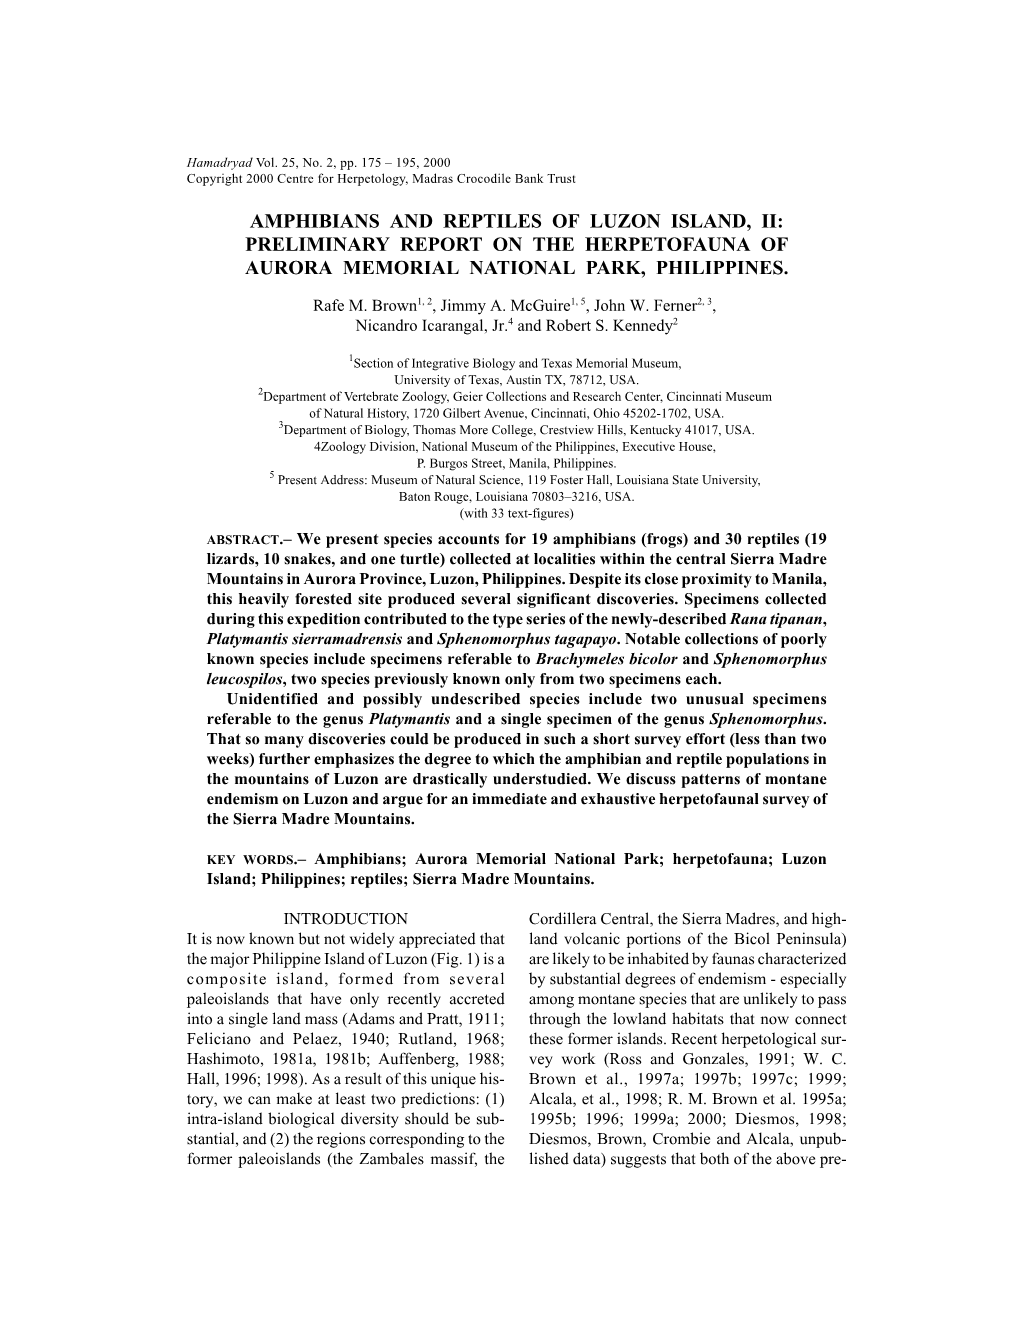 Amphibians and Reptiles of Luzon Island, Ii: Preliminary Report on the Herpetofauna of Aurora Memorial National Park, Philippines